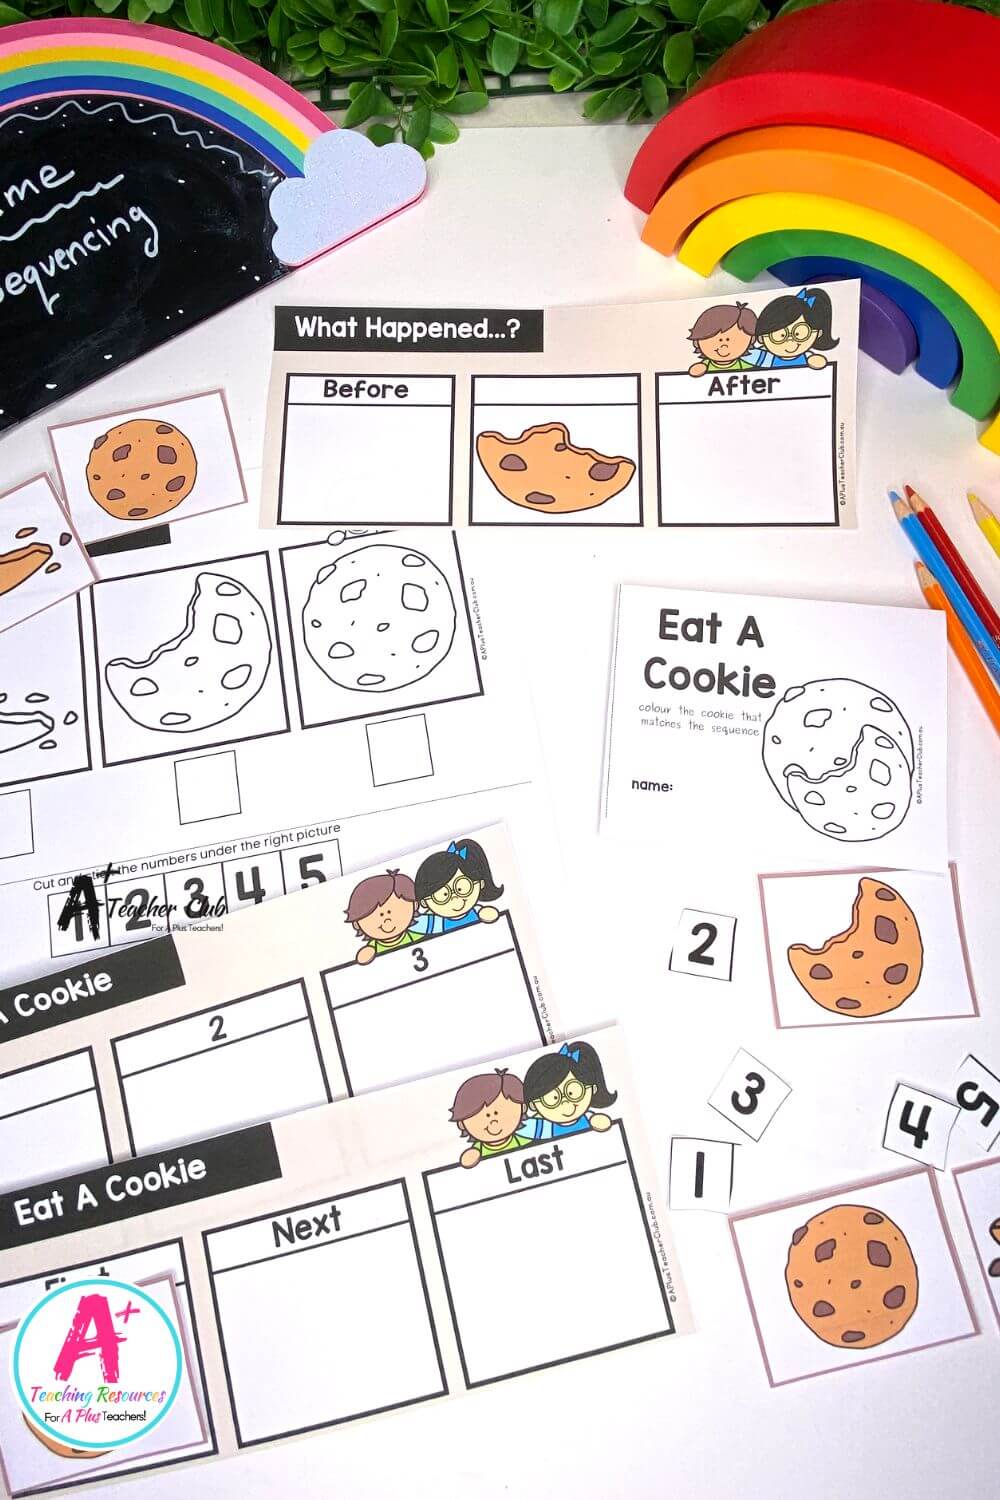 3-Step Sequencing Everyday Events - Eat A Cookie Activities Pack